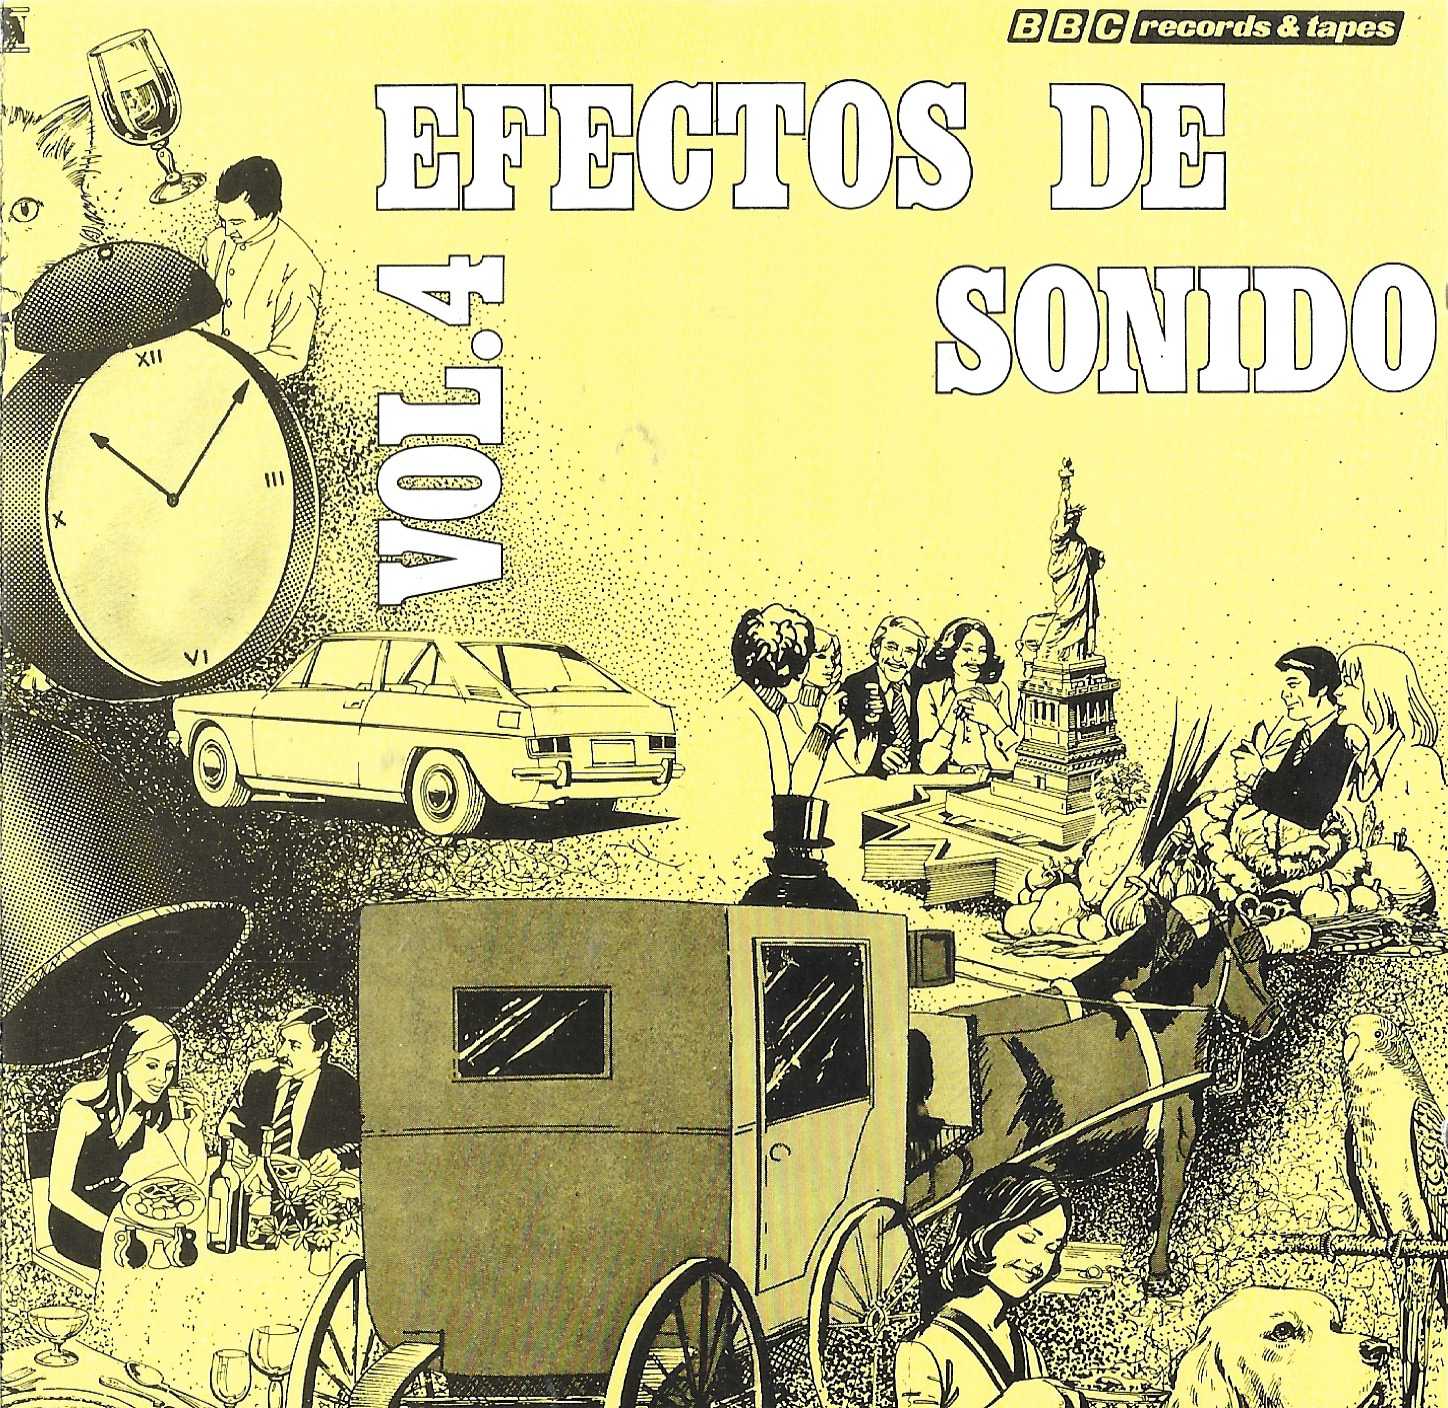 Picture of 95 0041 Effectos de sonido - Volume 4 (Spanish import) by artist Various from the BBC cds - Records and Tapes library